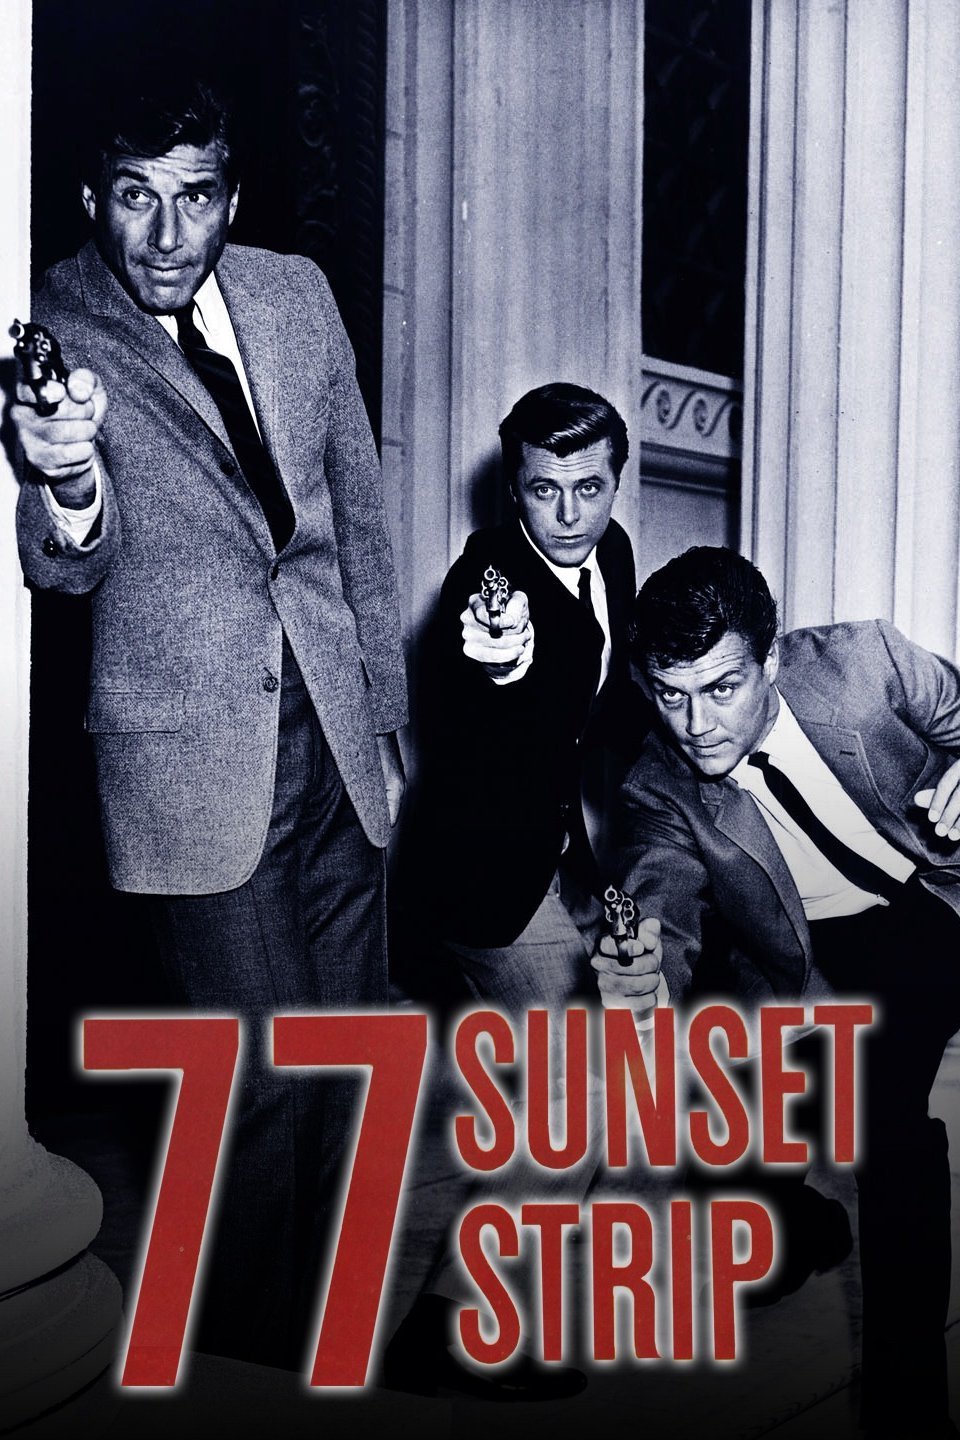 77 Sunset Strip Pictures.